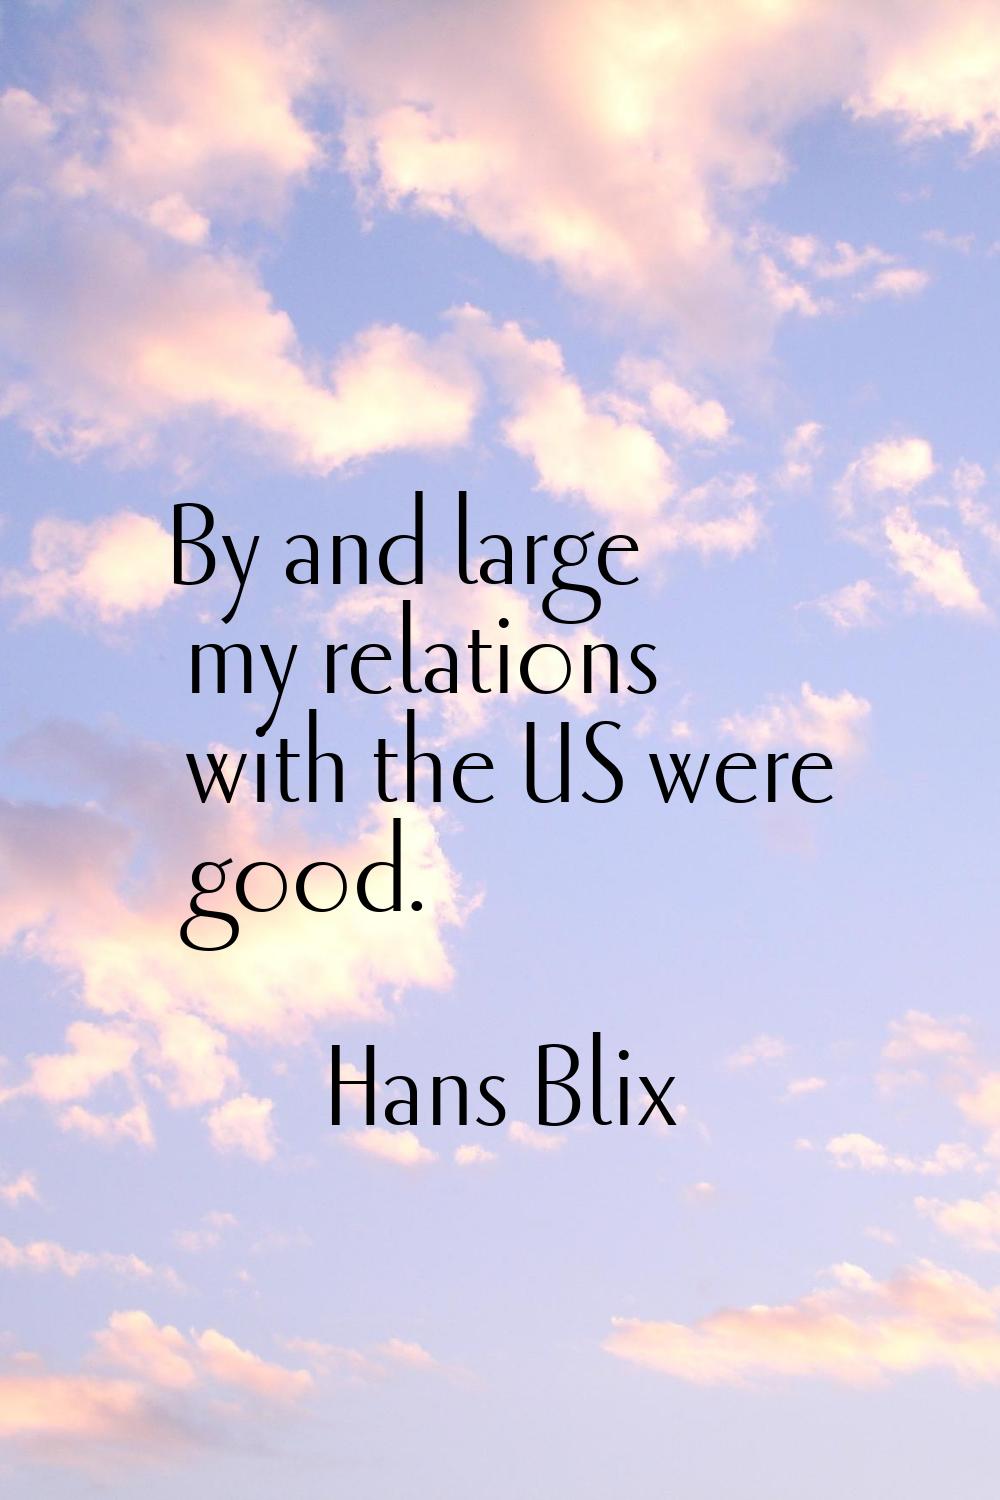 By and large my relations with the US were good.